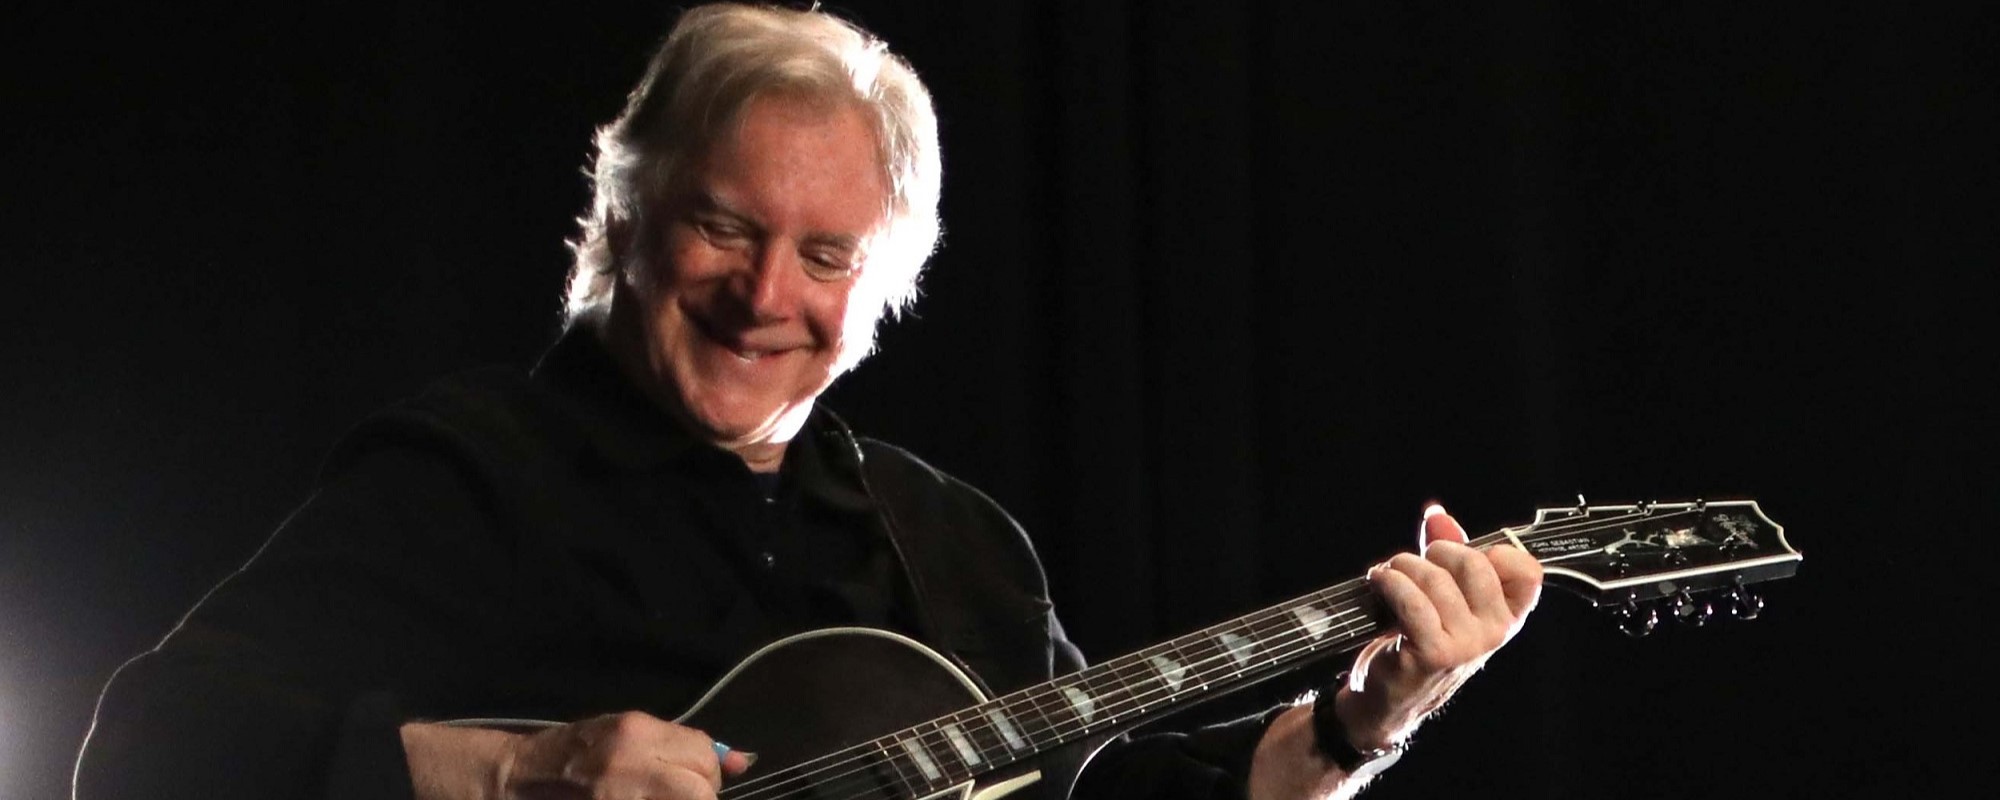 5 Fascinating Facts About The Lovin’ Spoonful’s John Sebastian in Honor of His 80th Birthday